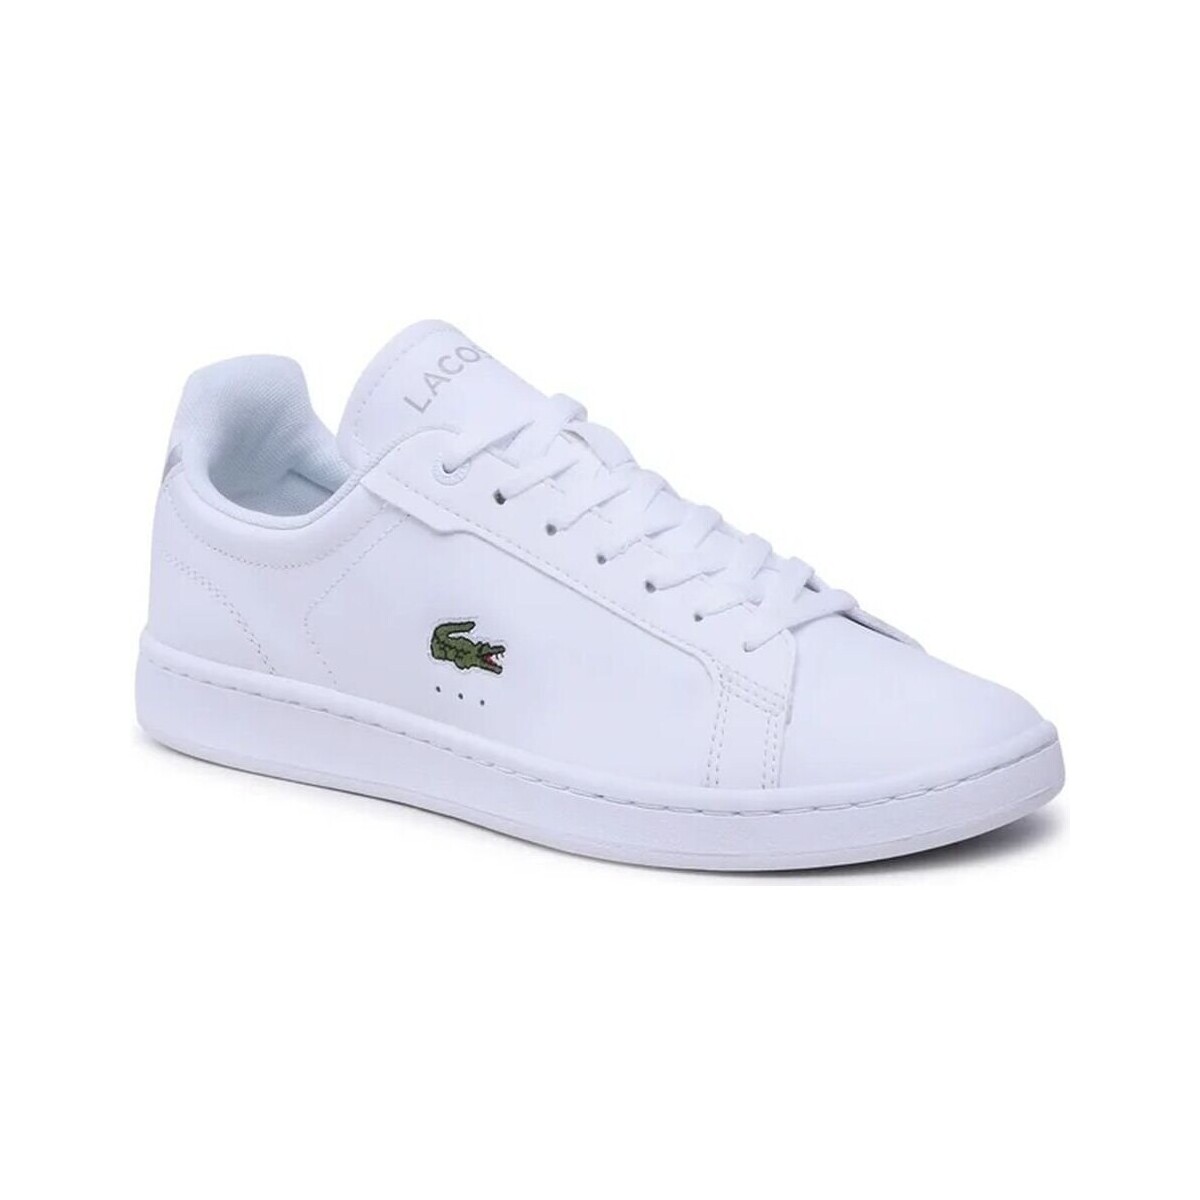 Lacoste Carnaby Pro Bl23 1 Sma White